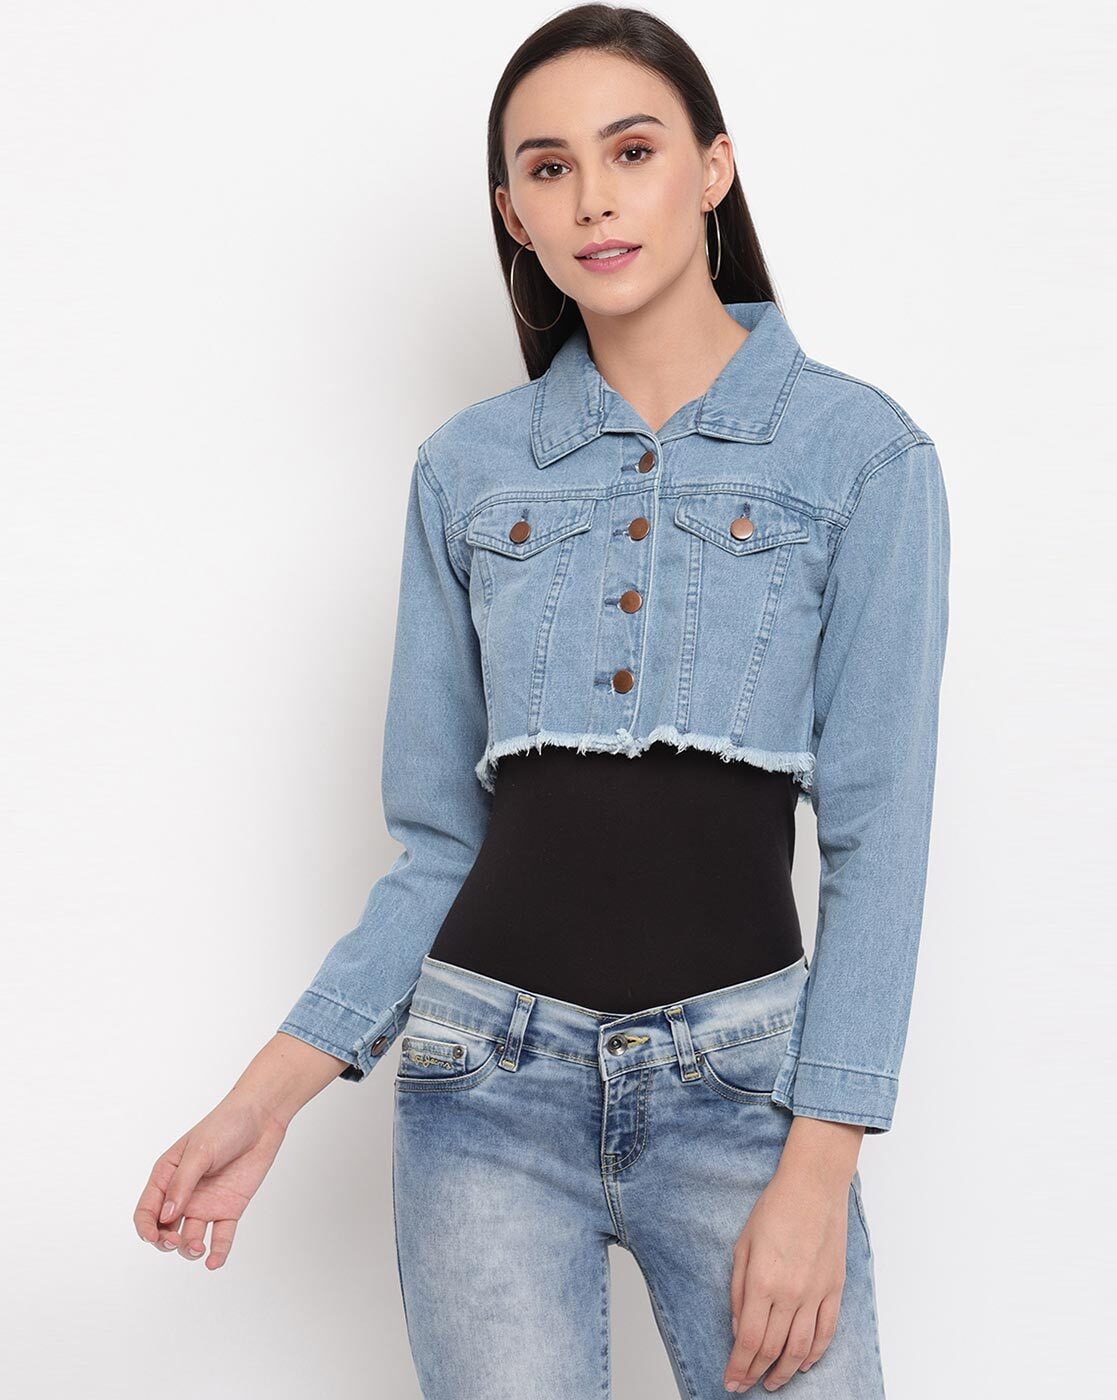 Black Cropped Top with Denim Jacket Outfits (8 ideas & outfits) | Lookastic